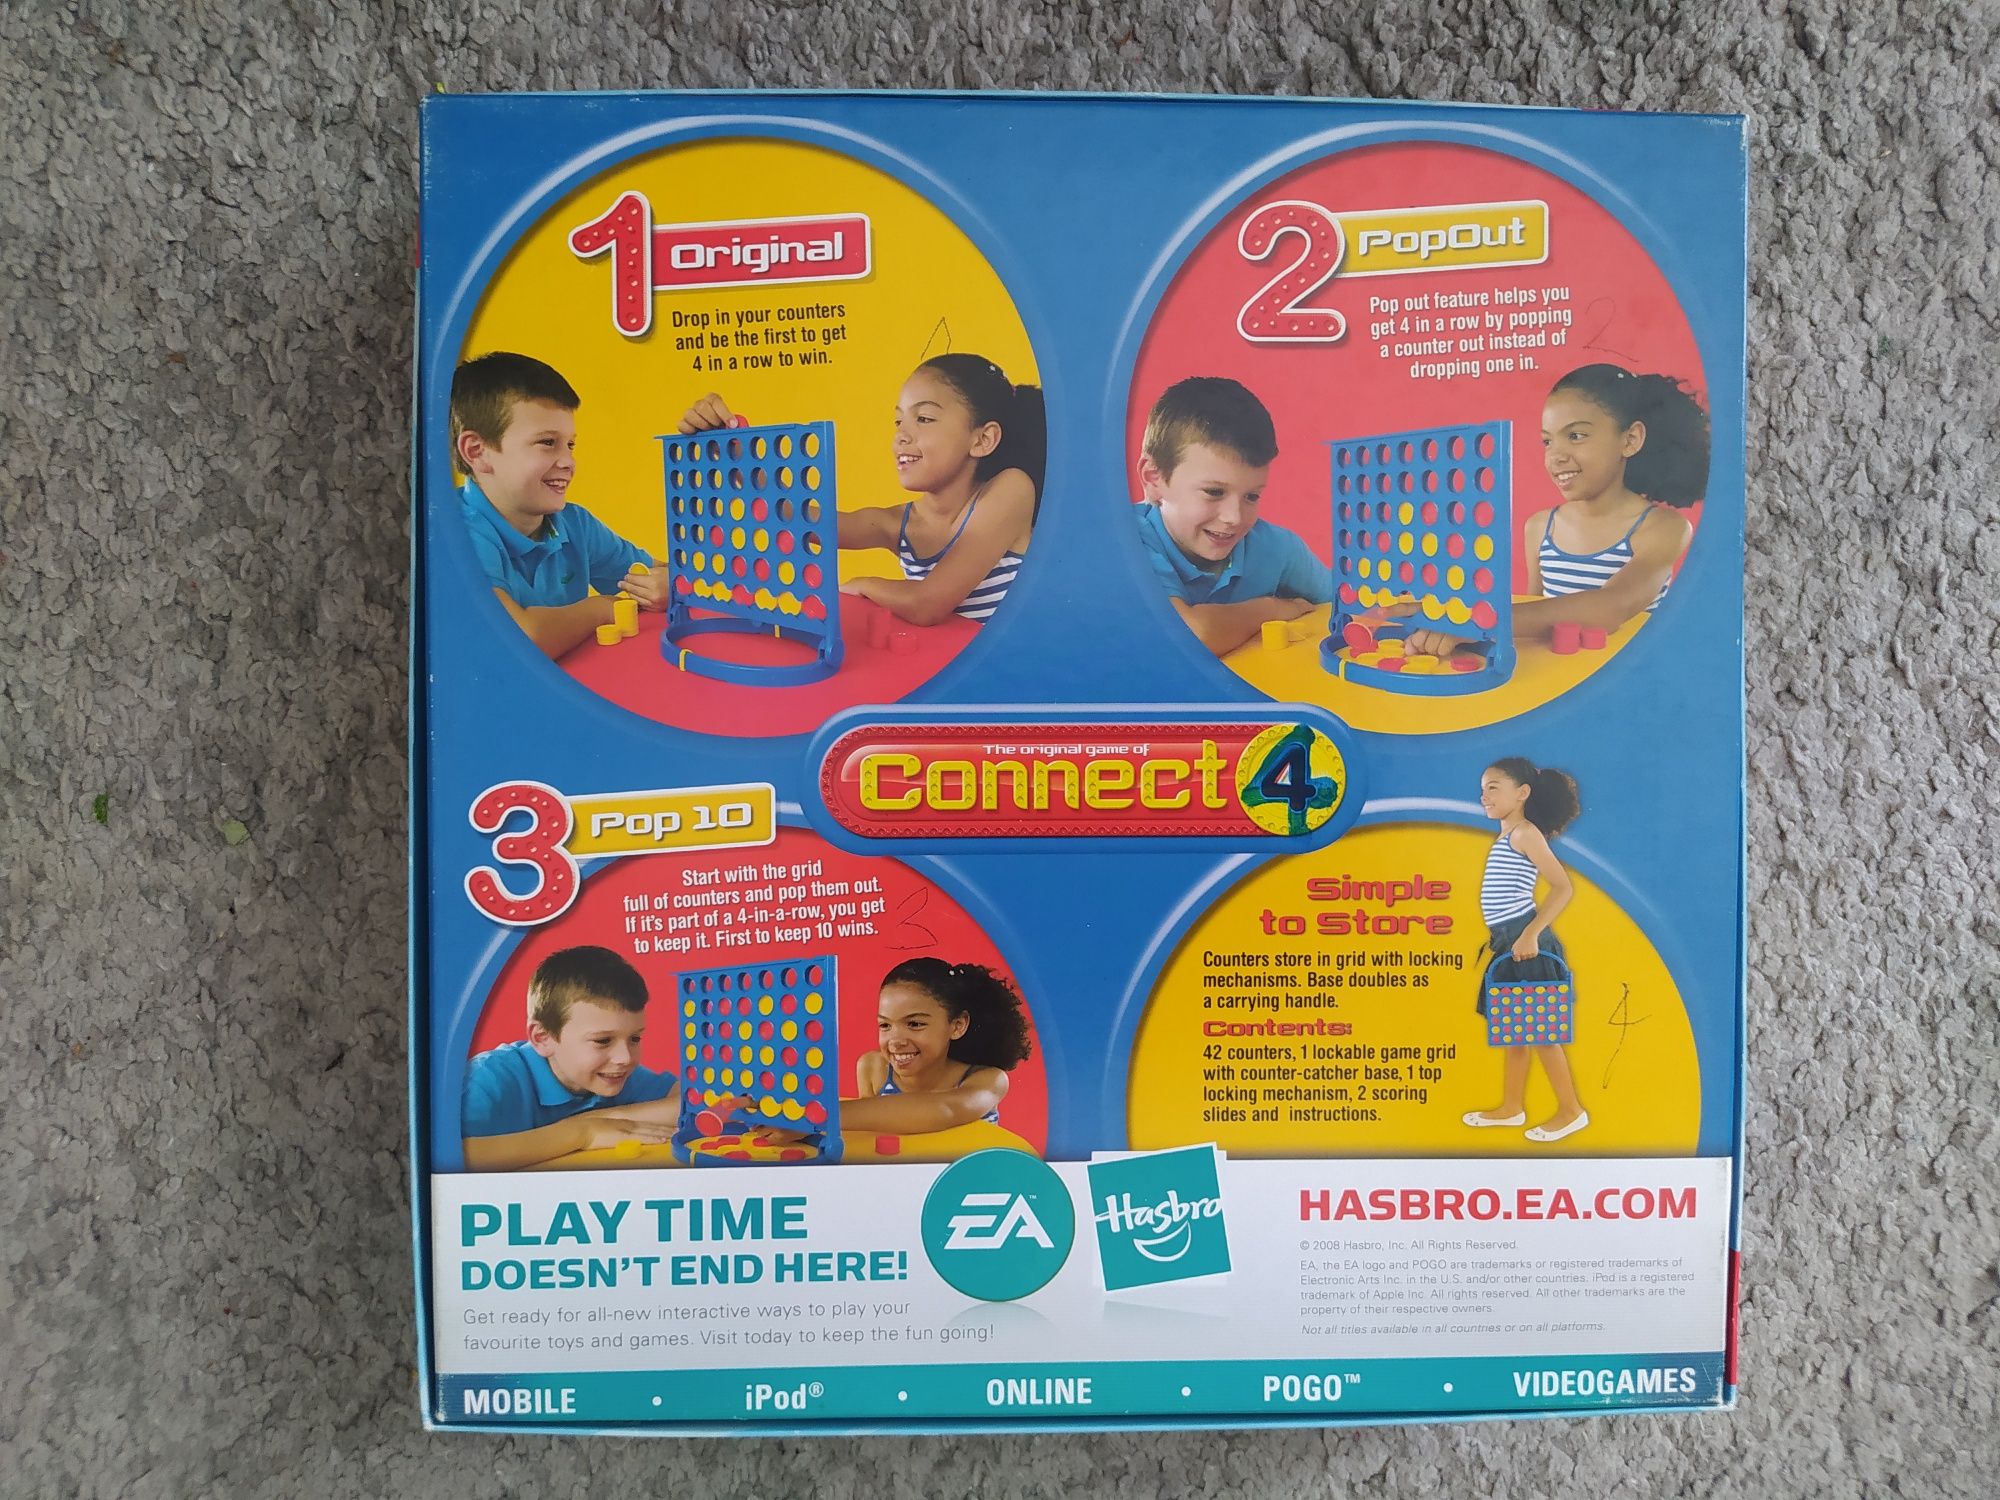 The original game of Connect 6+ od Hasbro